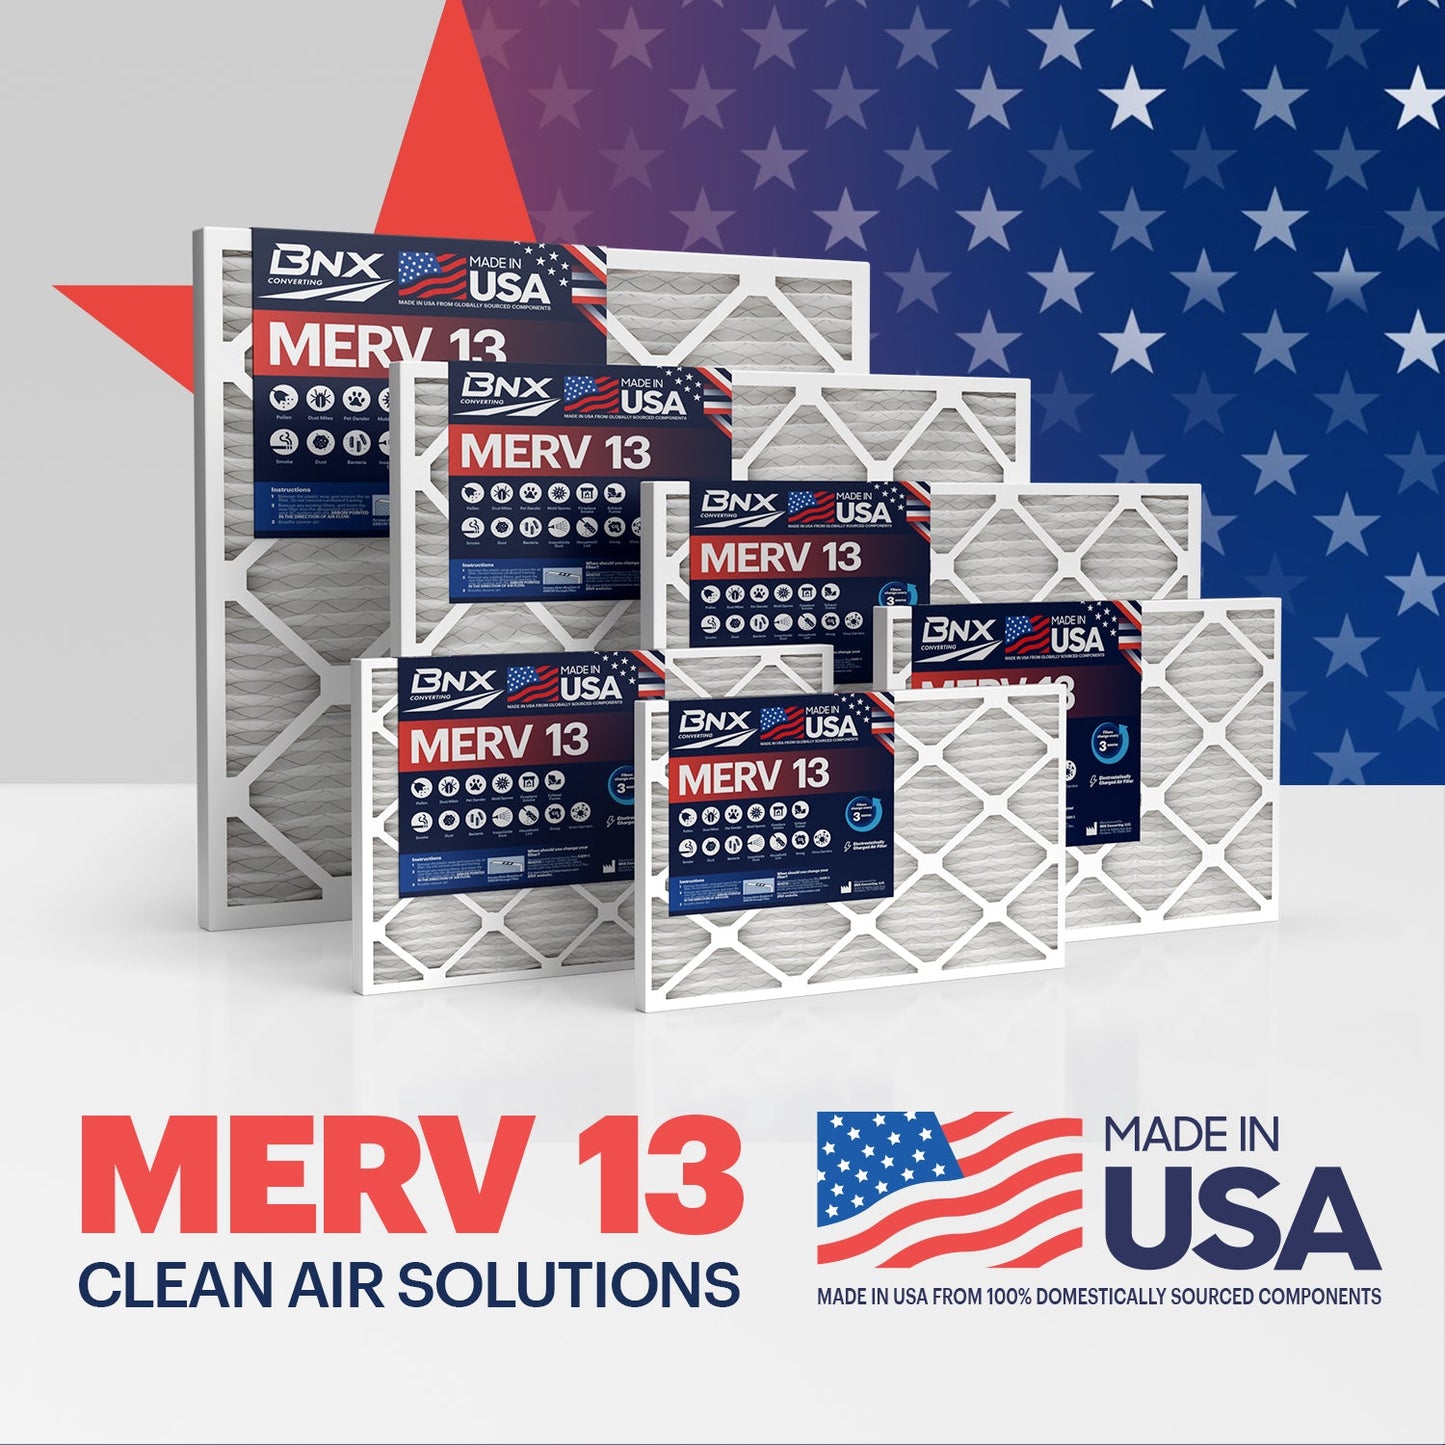 BNX TruFilter 16x25x1 MERV 13 Pleated Air Filter – Made in USA (6-Pack)